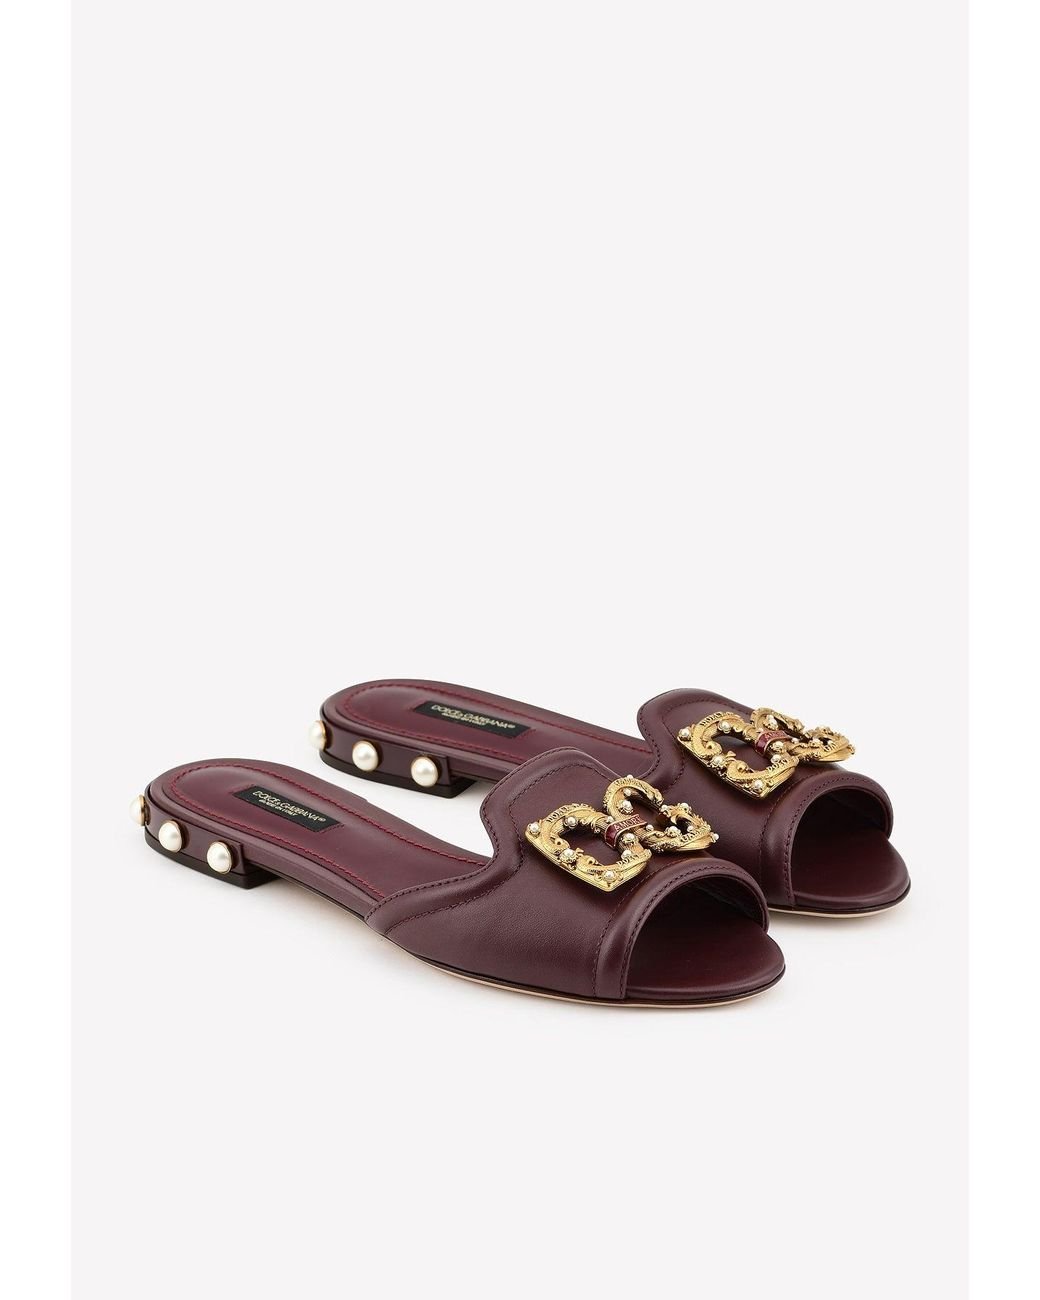 Dolce & Gabbana Bianca Dg Amore Logo Slides In Nappa Leather in Brown | Lyst